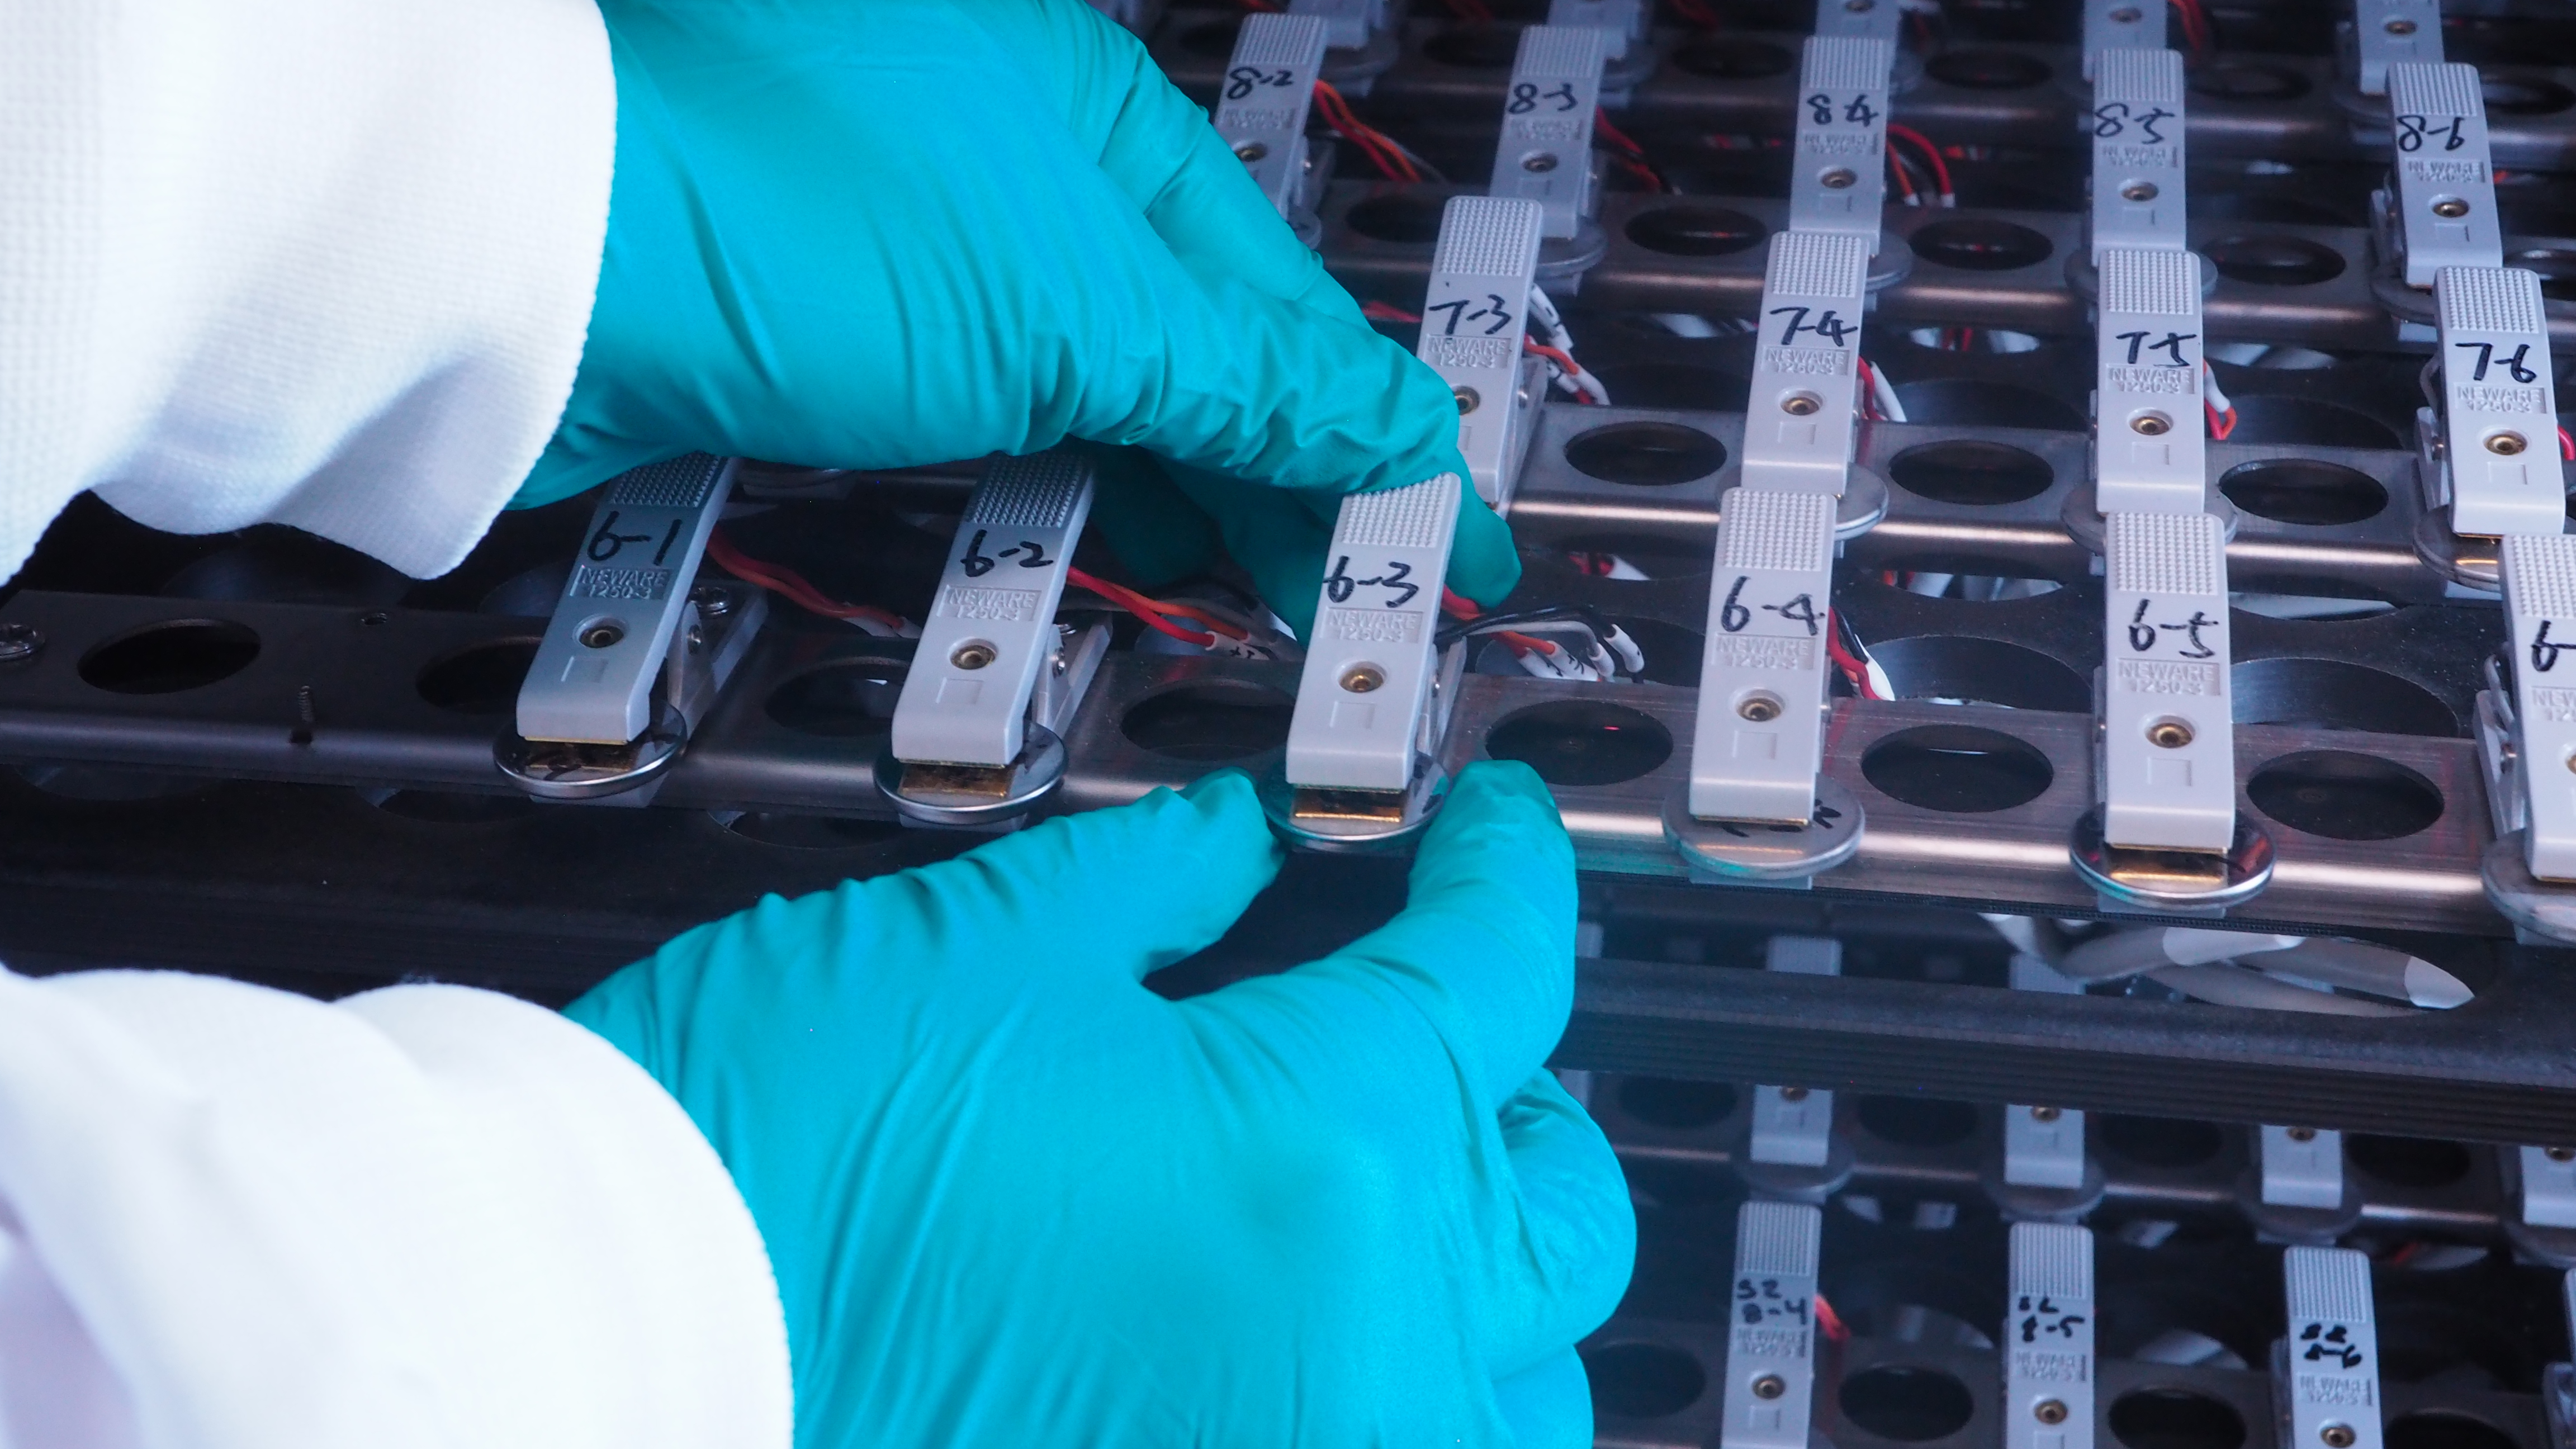 A look inside a battery cycler where rows of dozens of coin-shaped batteries are held in place by clamps bearing sample numbers.